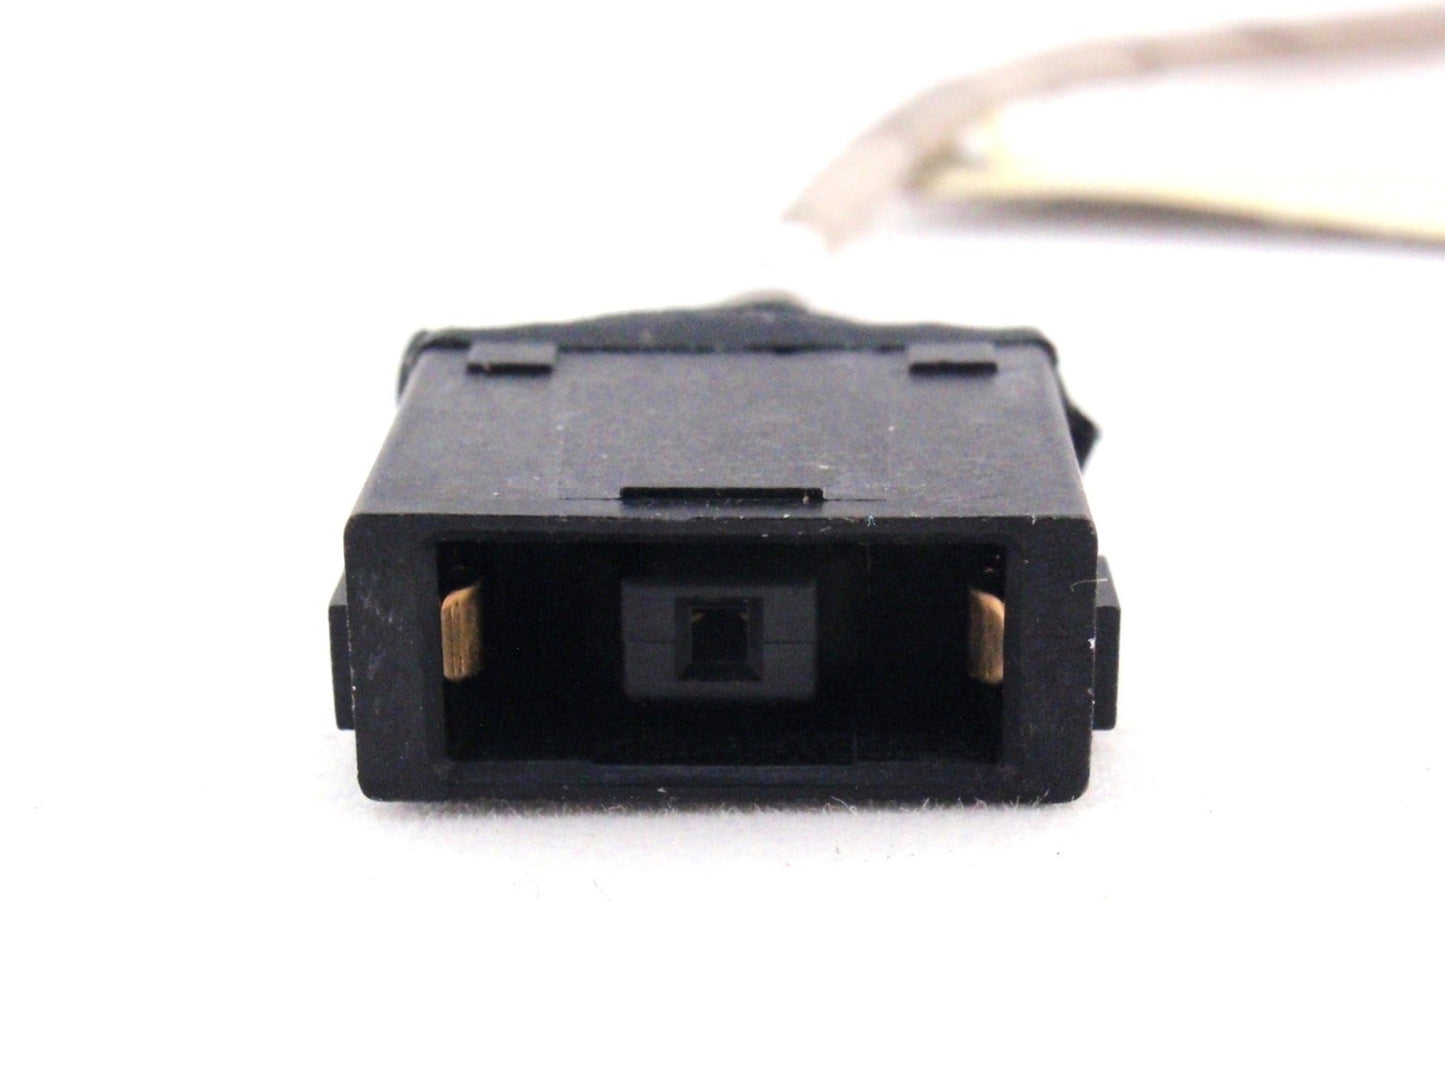 Lenovo New DC In Power Jack Charging Port Connector Cable M51-35 M51-80 450.03N01.0001 450.03N01.0011